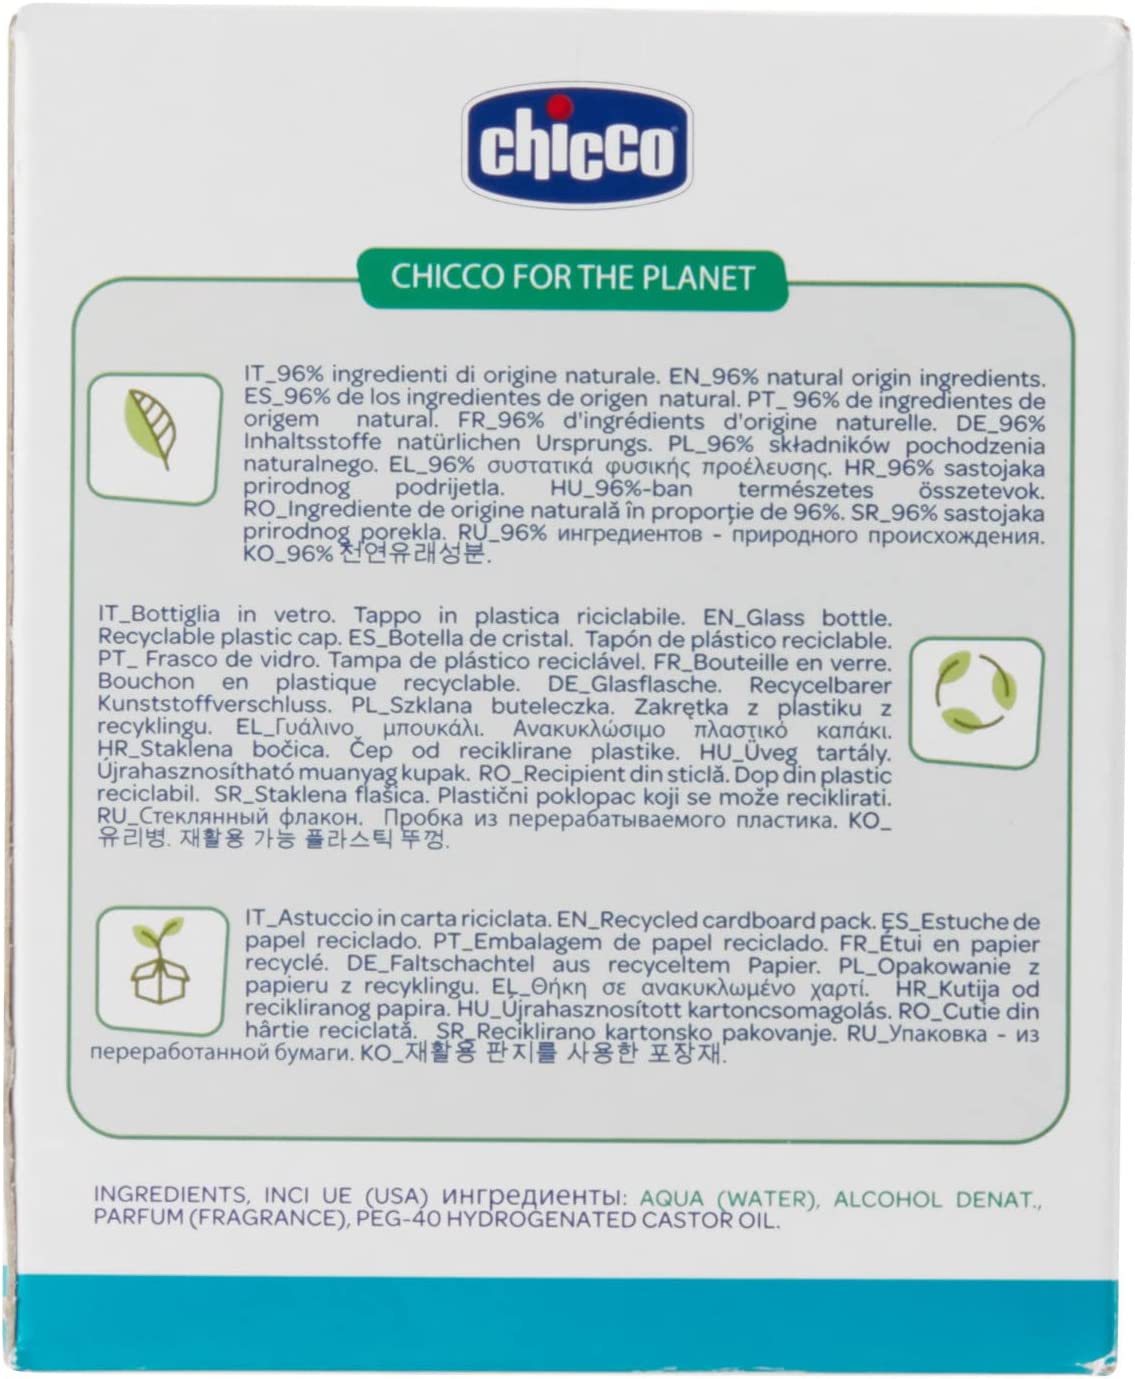 Chicco Baby Moments Eau De Cologne Refreshing and Delicate for Baby Skin 0M+ 100Ml, Multi Color